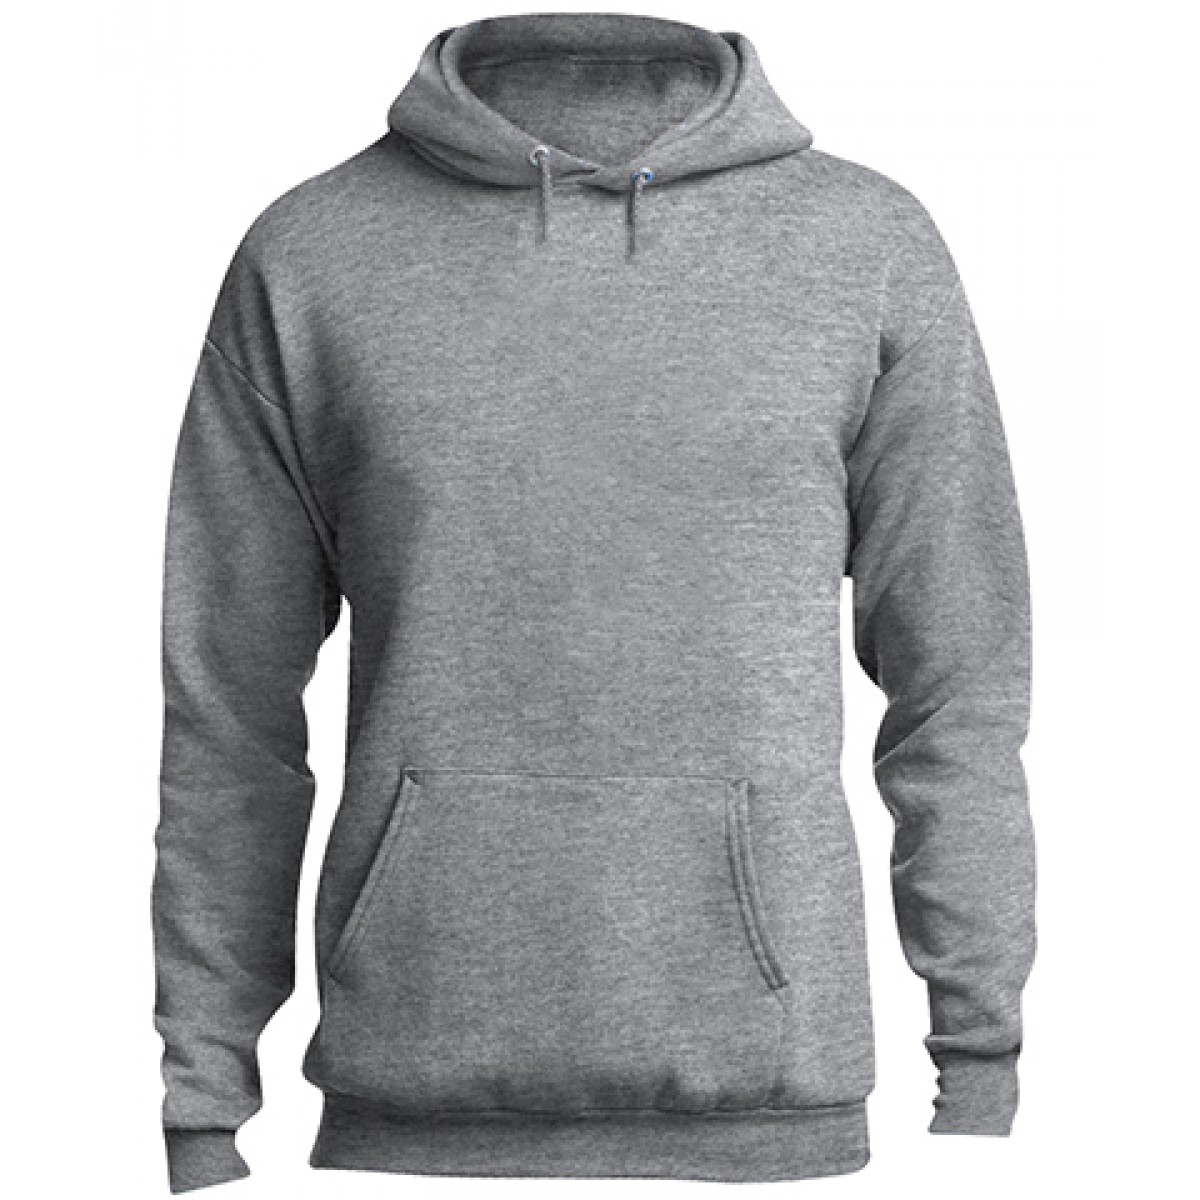 Classic Pullover Hooded Sweatshirt-Athletic Heather-3XL